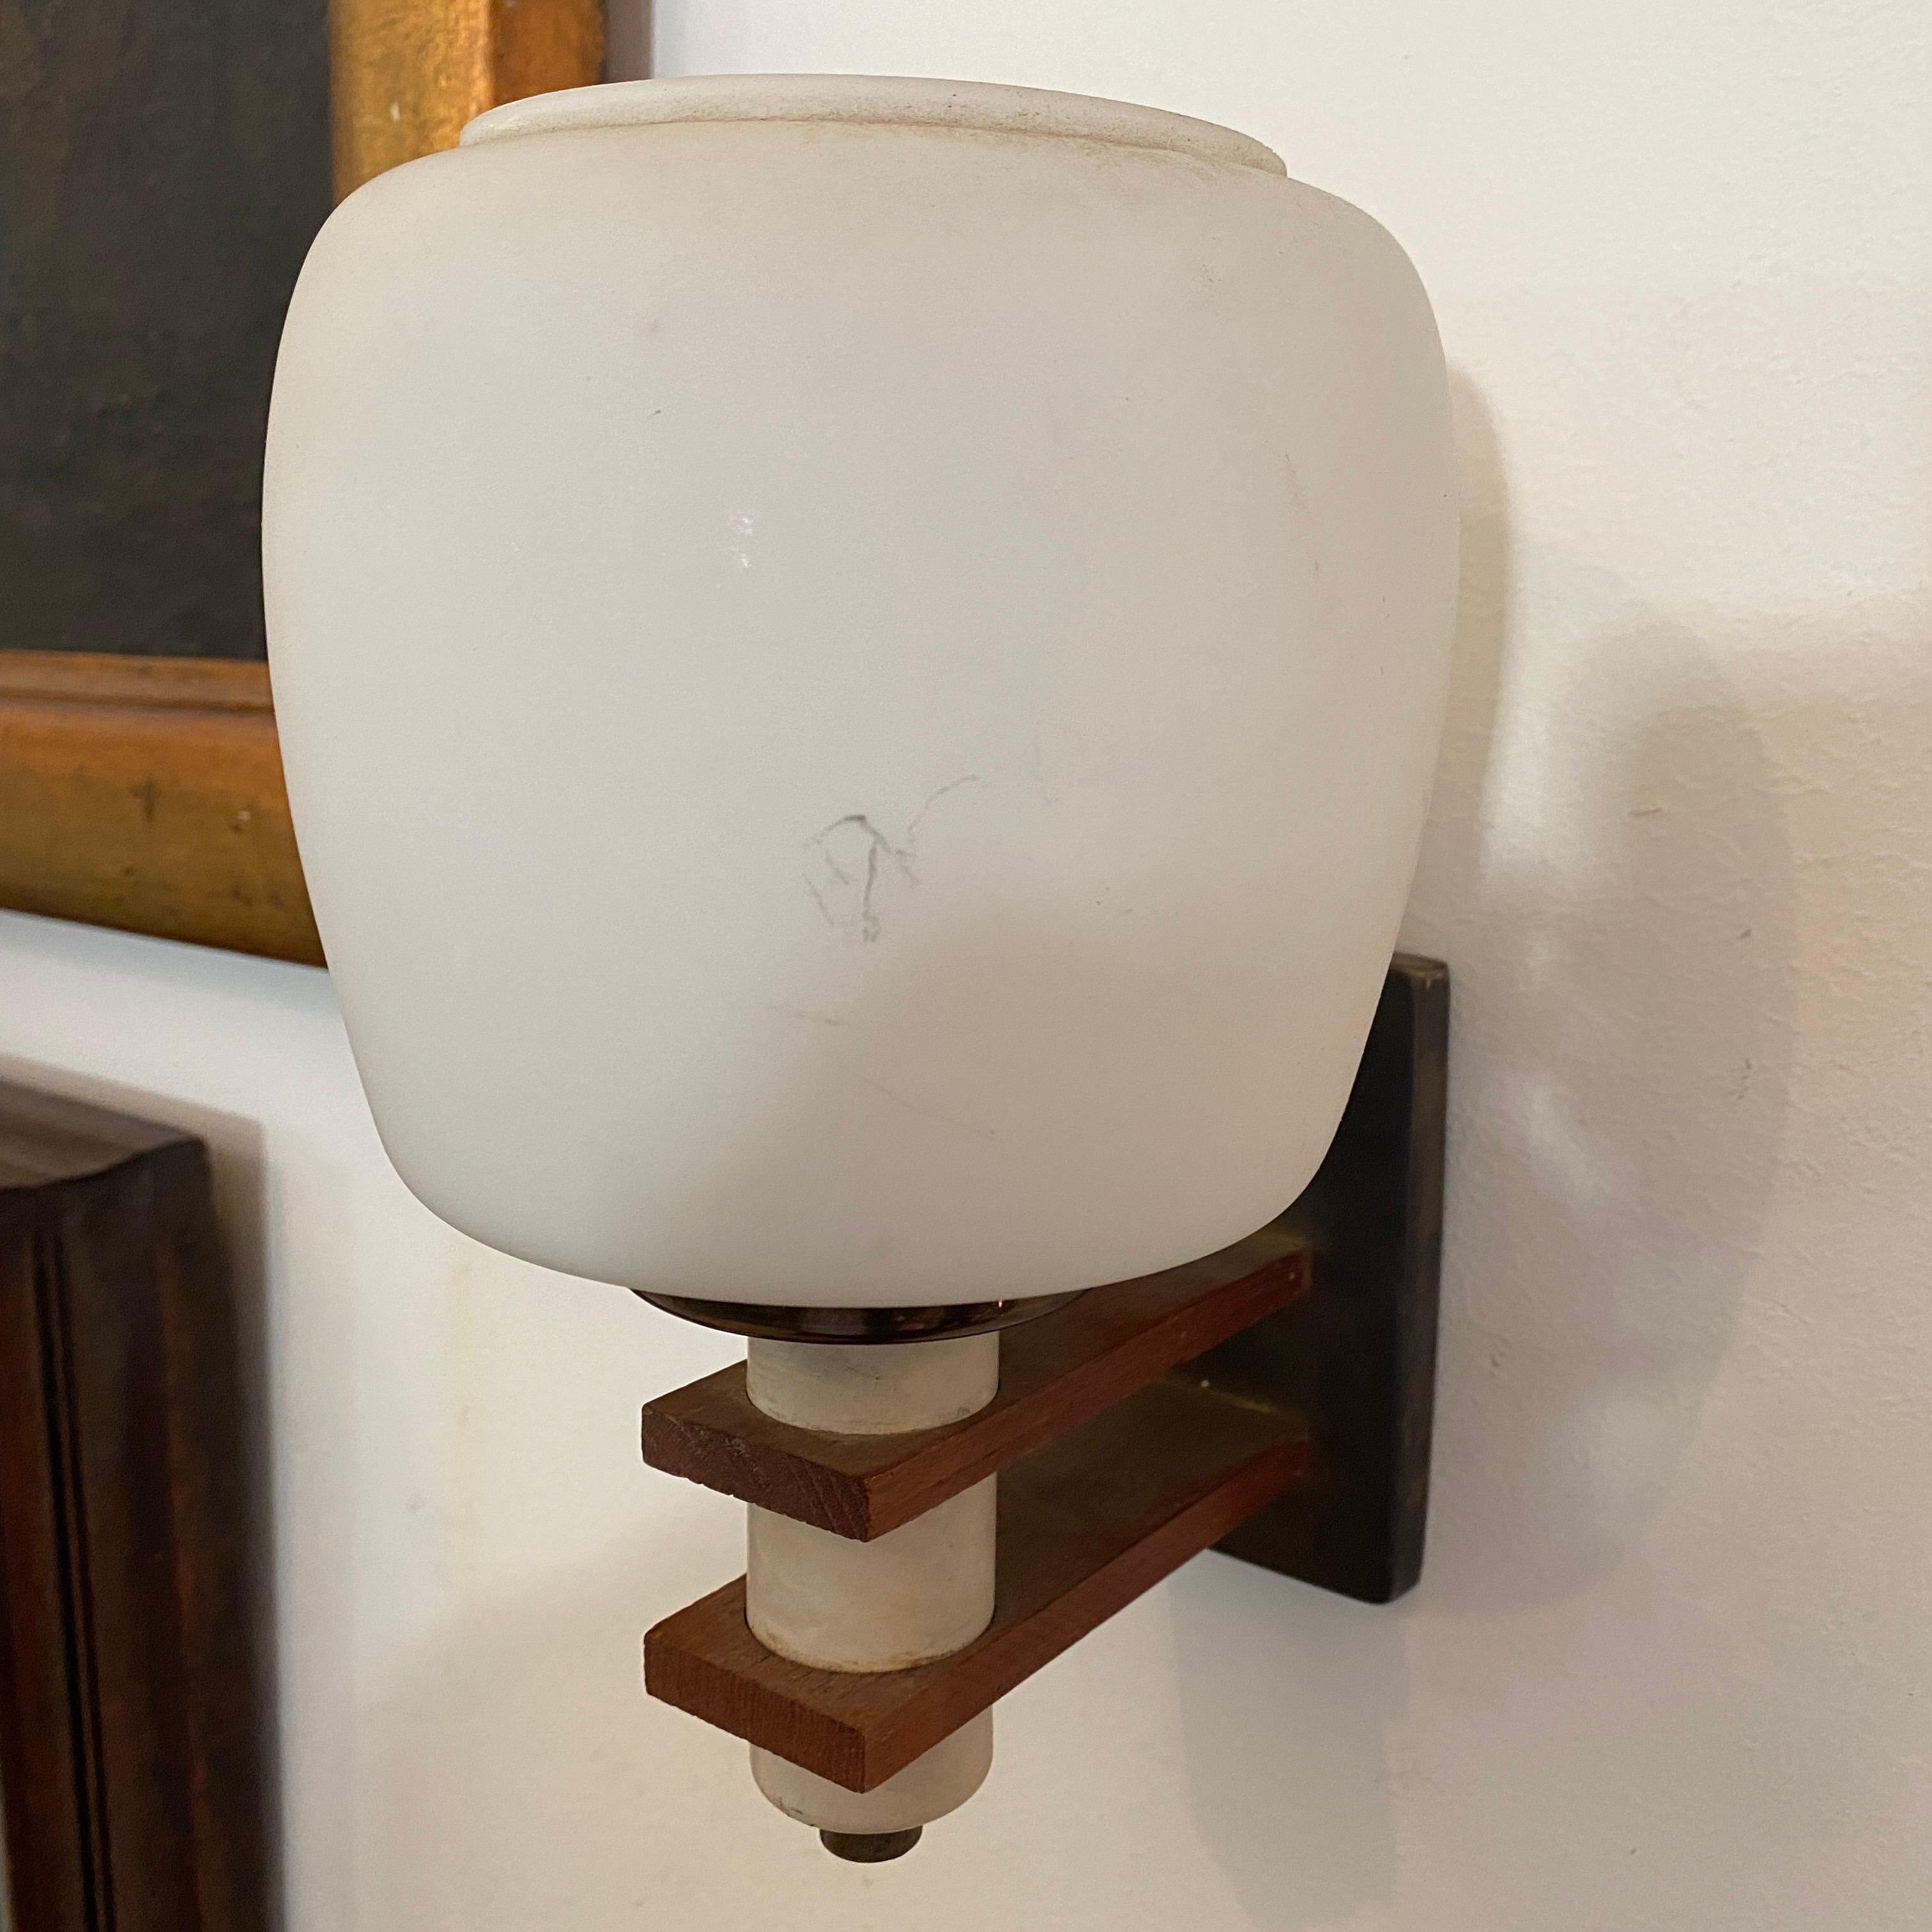 Pair of Mid-Century Modern Italian Wall Sconces in the Manner of Arredoluce 1